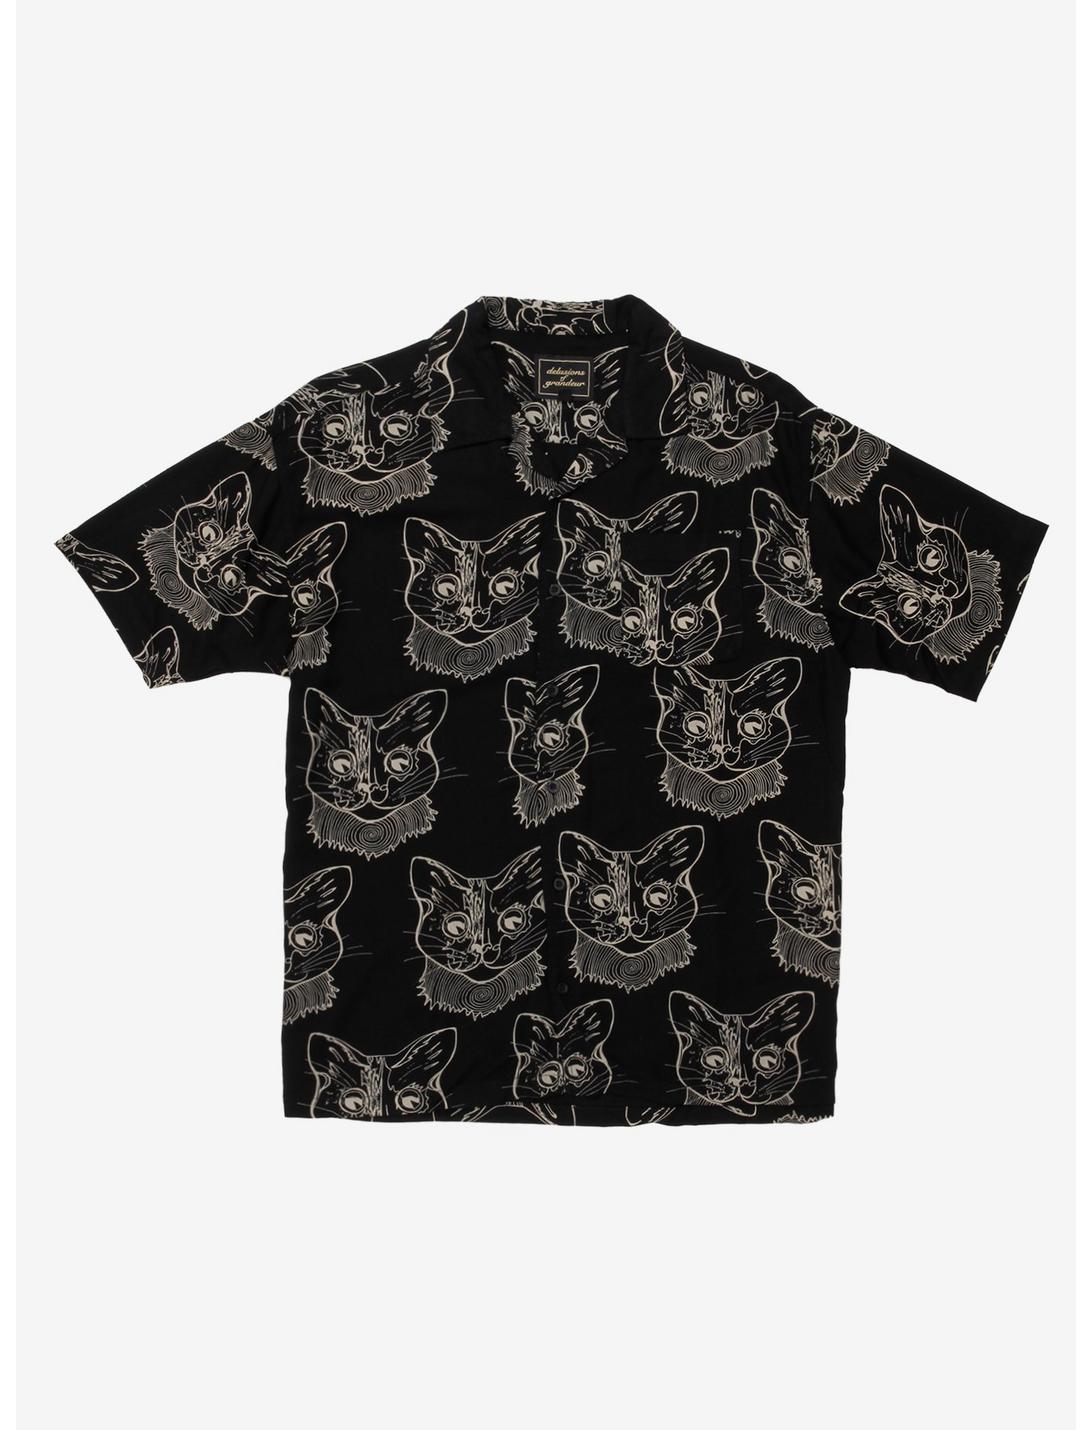 Black & Tan Cat Woven Button-Up, ABSTRACT, hi-res